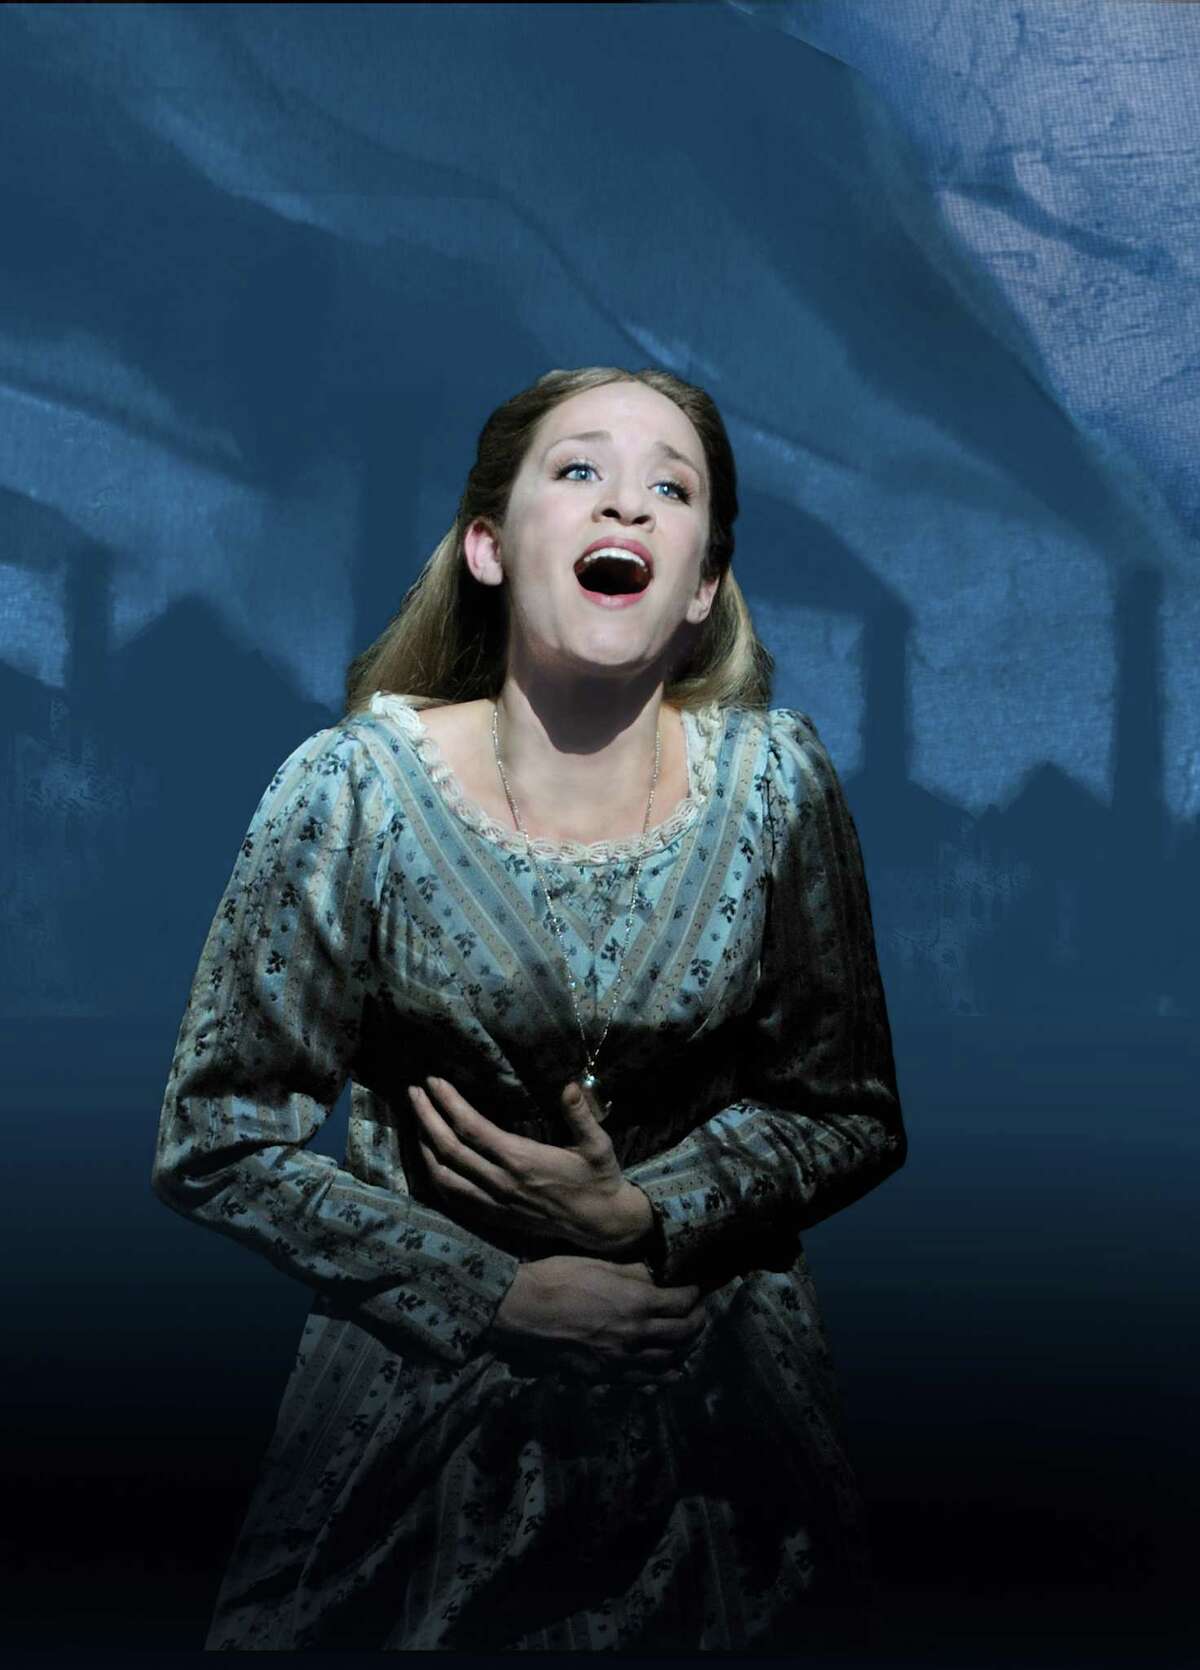 "I Dreamed a Dream," by Betsy Morgan as Fantine in the new 25th anniversary of "Les Mis rables."